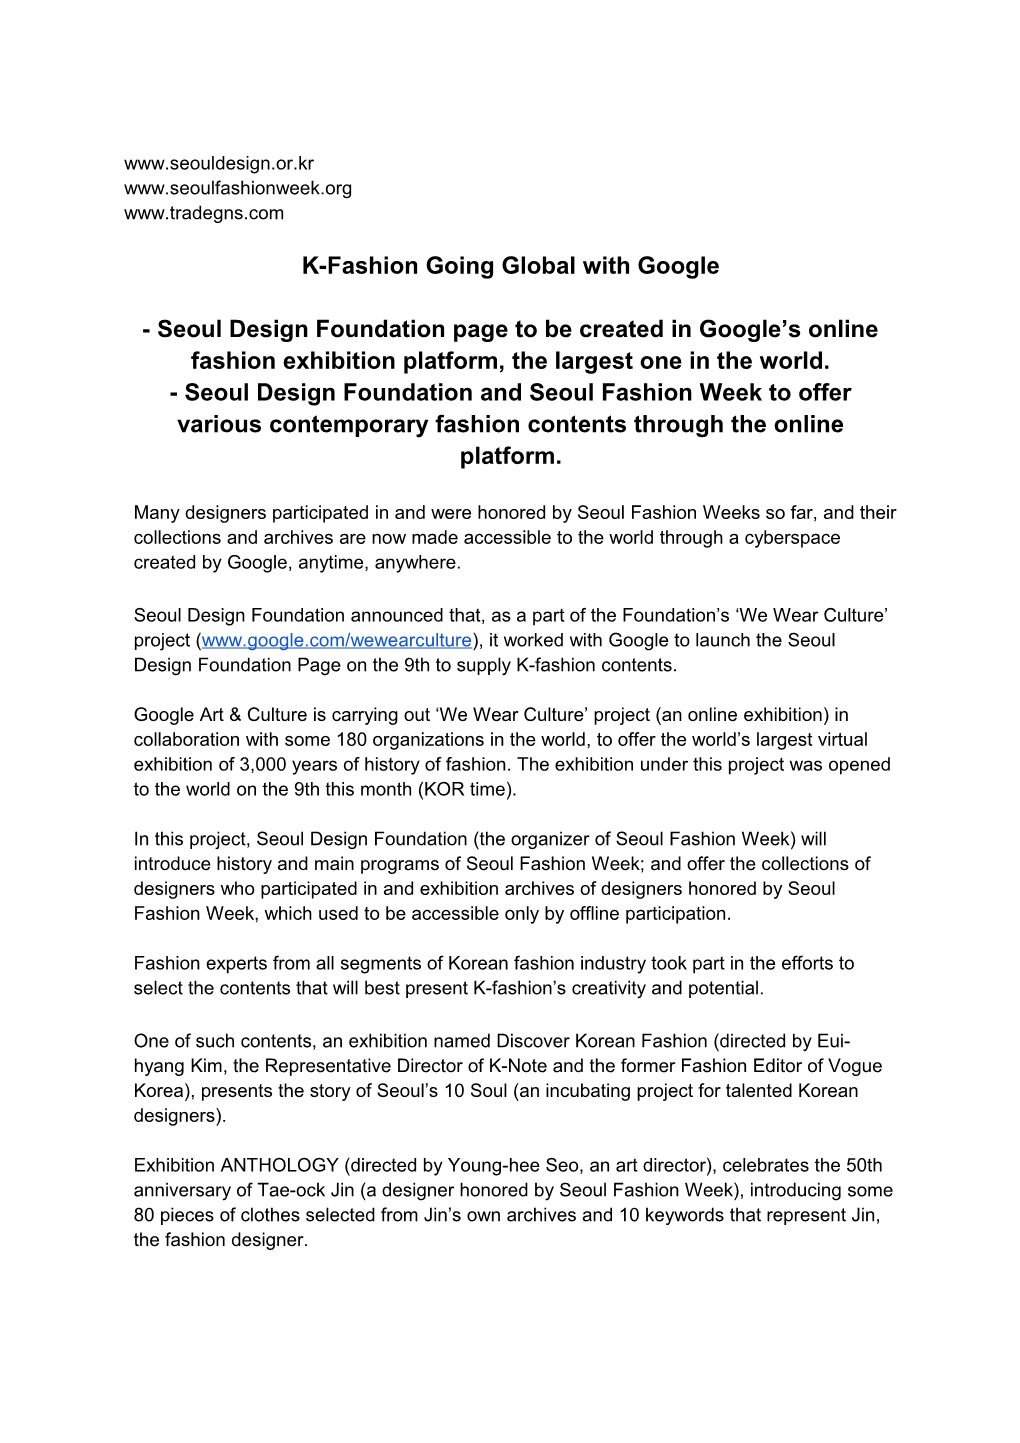 K-Fashion Going Global with Google